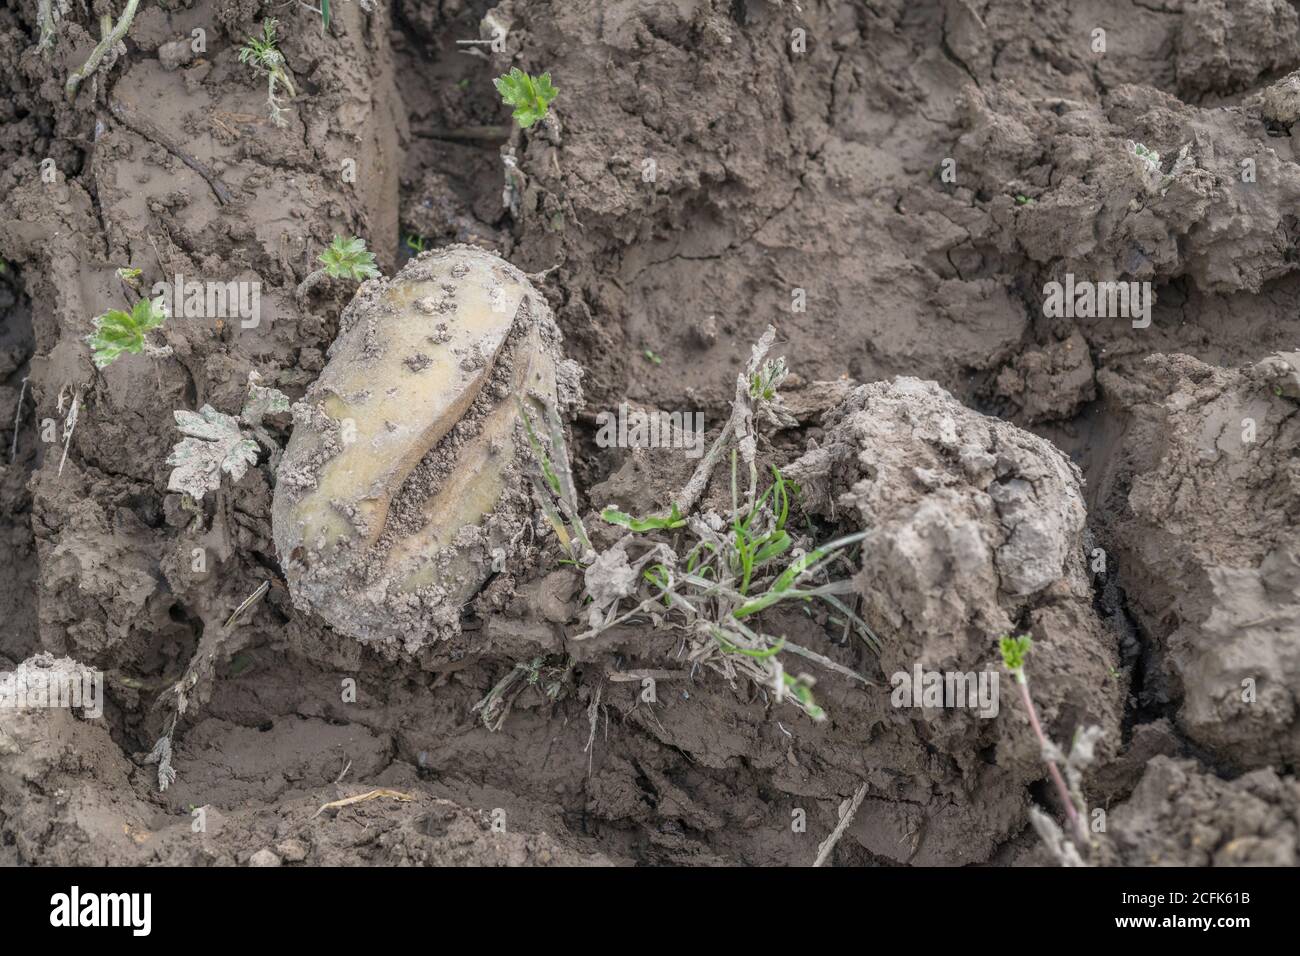 Damaged potato crop / potato tuber. Discarded cropped potato showing growth cracks, physiological deformation which form during the growing season. Stock Photo